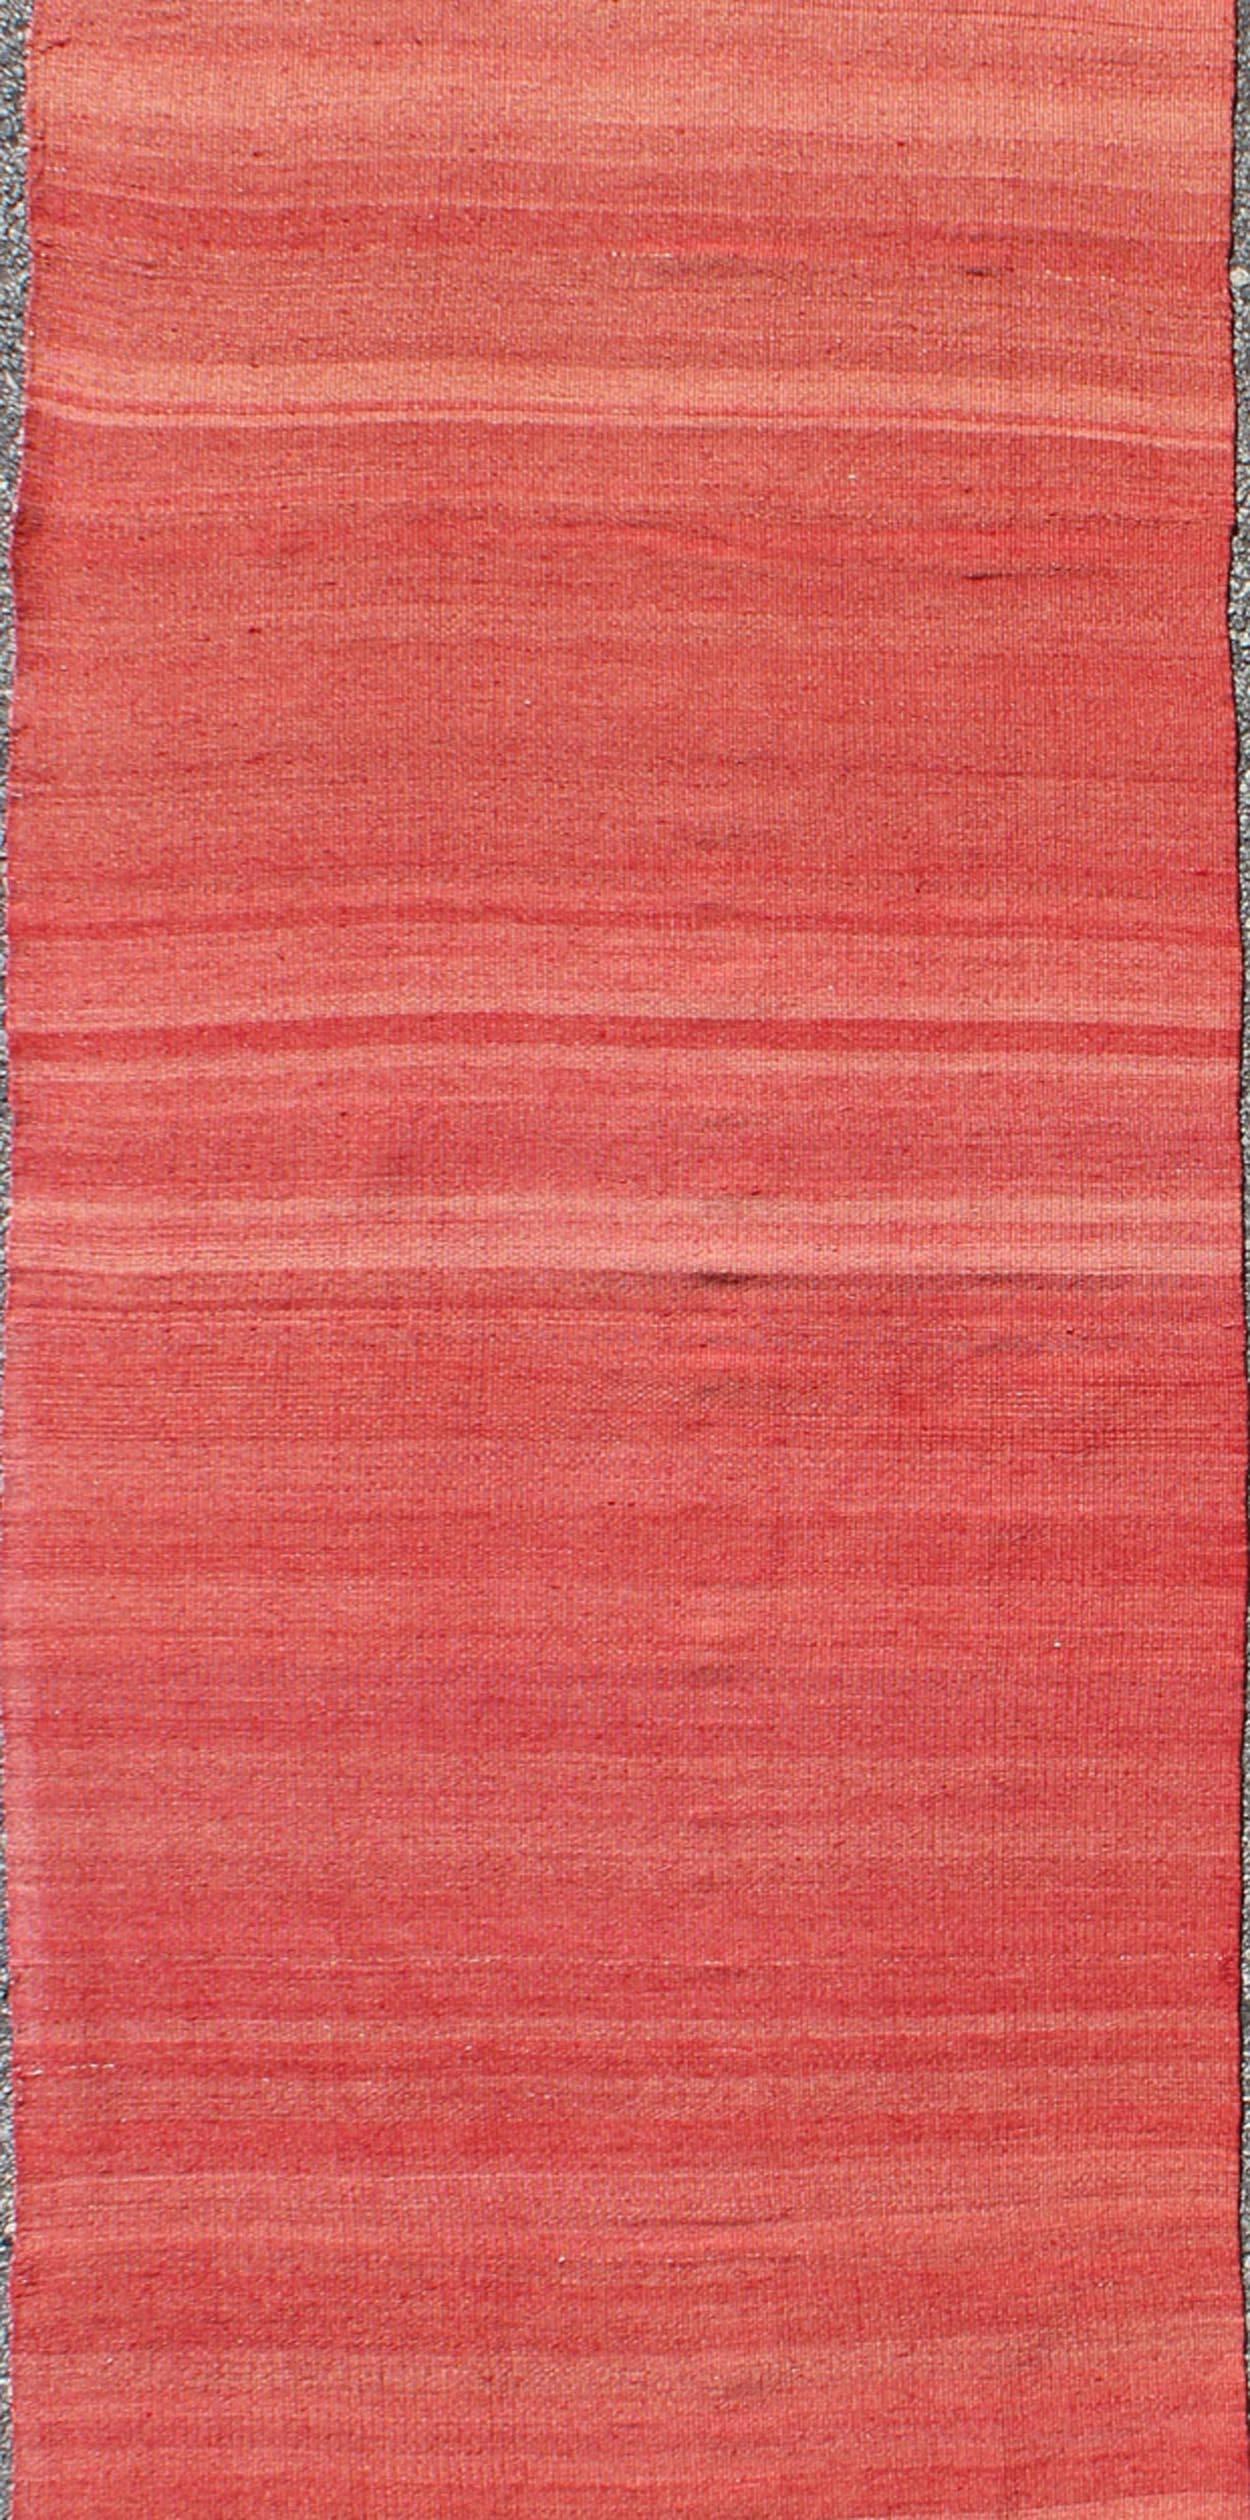 Hand-Woven Red, Yellow, and Salmon Pink Striped Midcentury Vintage Turkish Kilim Rug For Sale